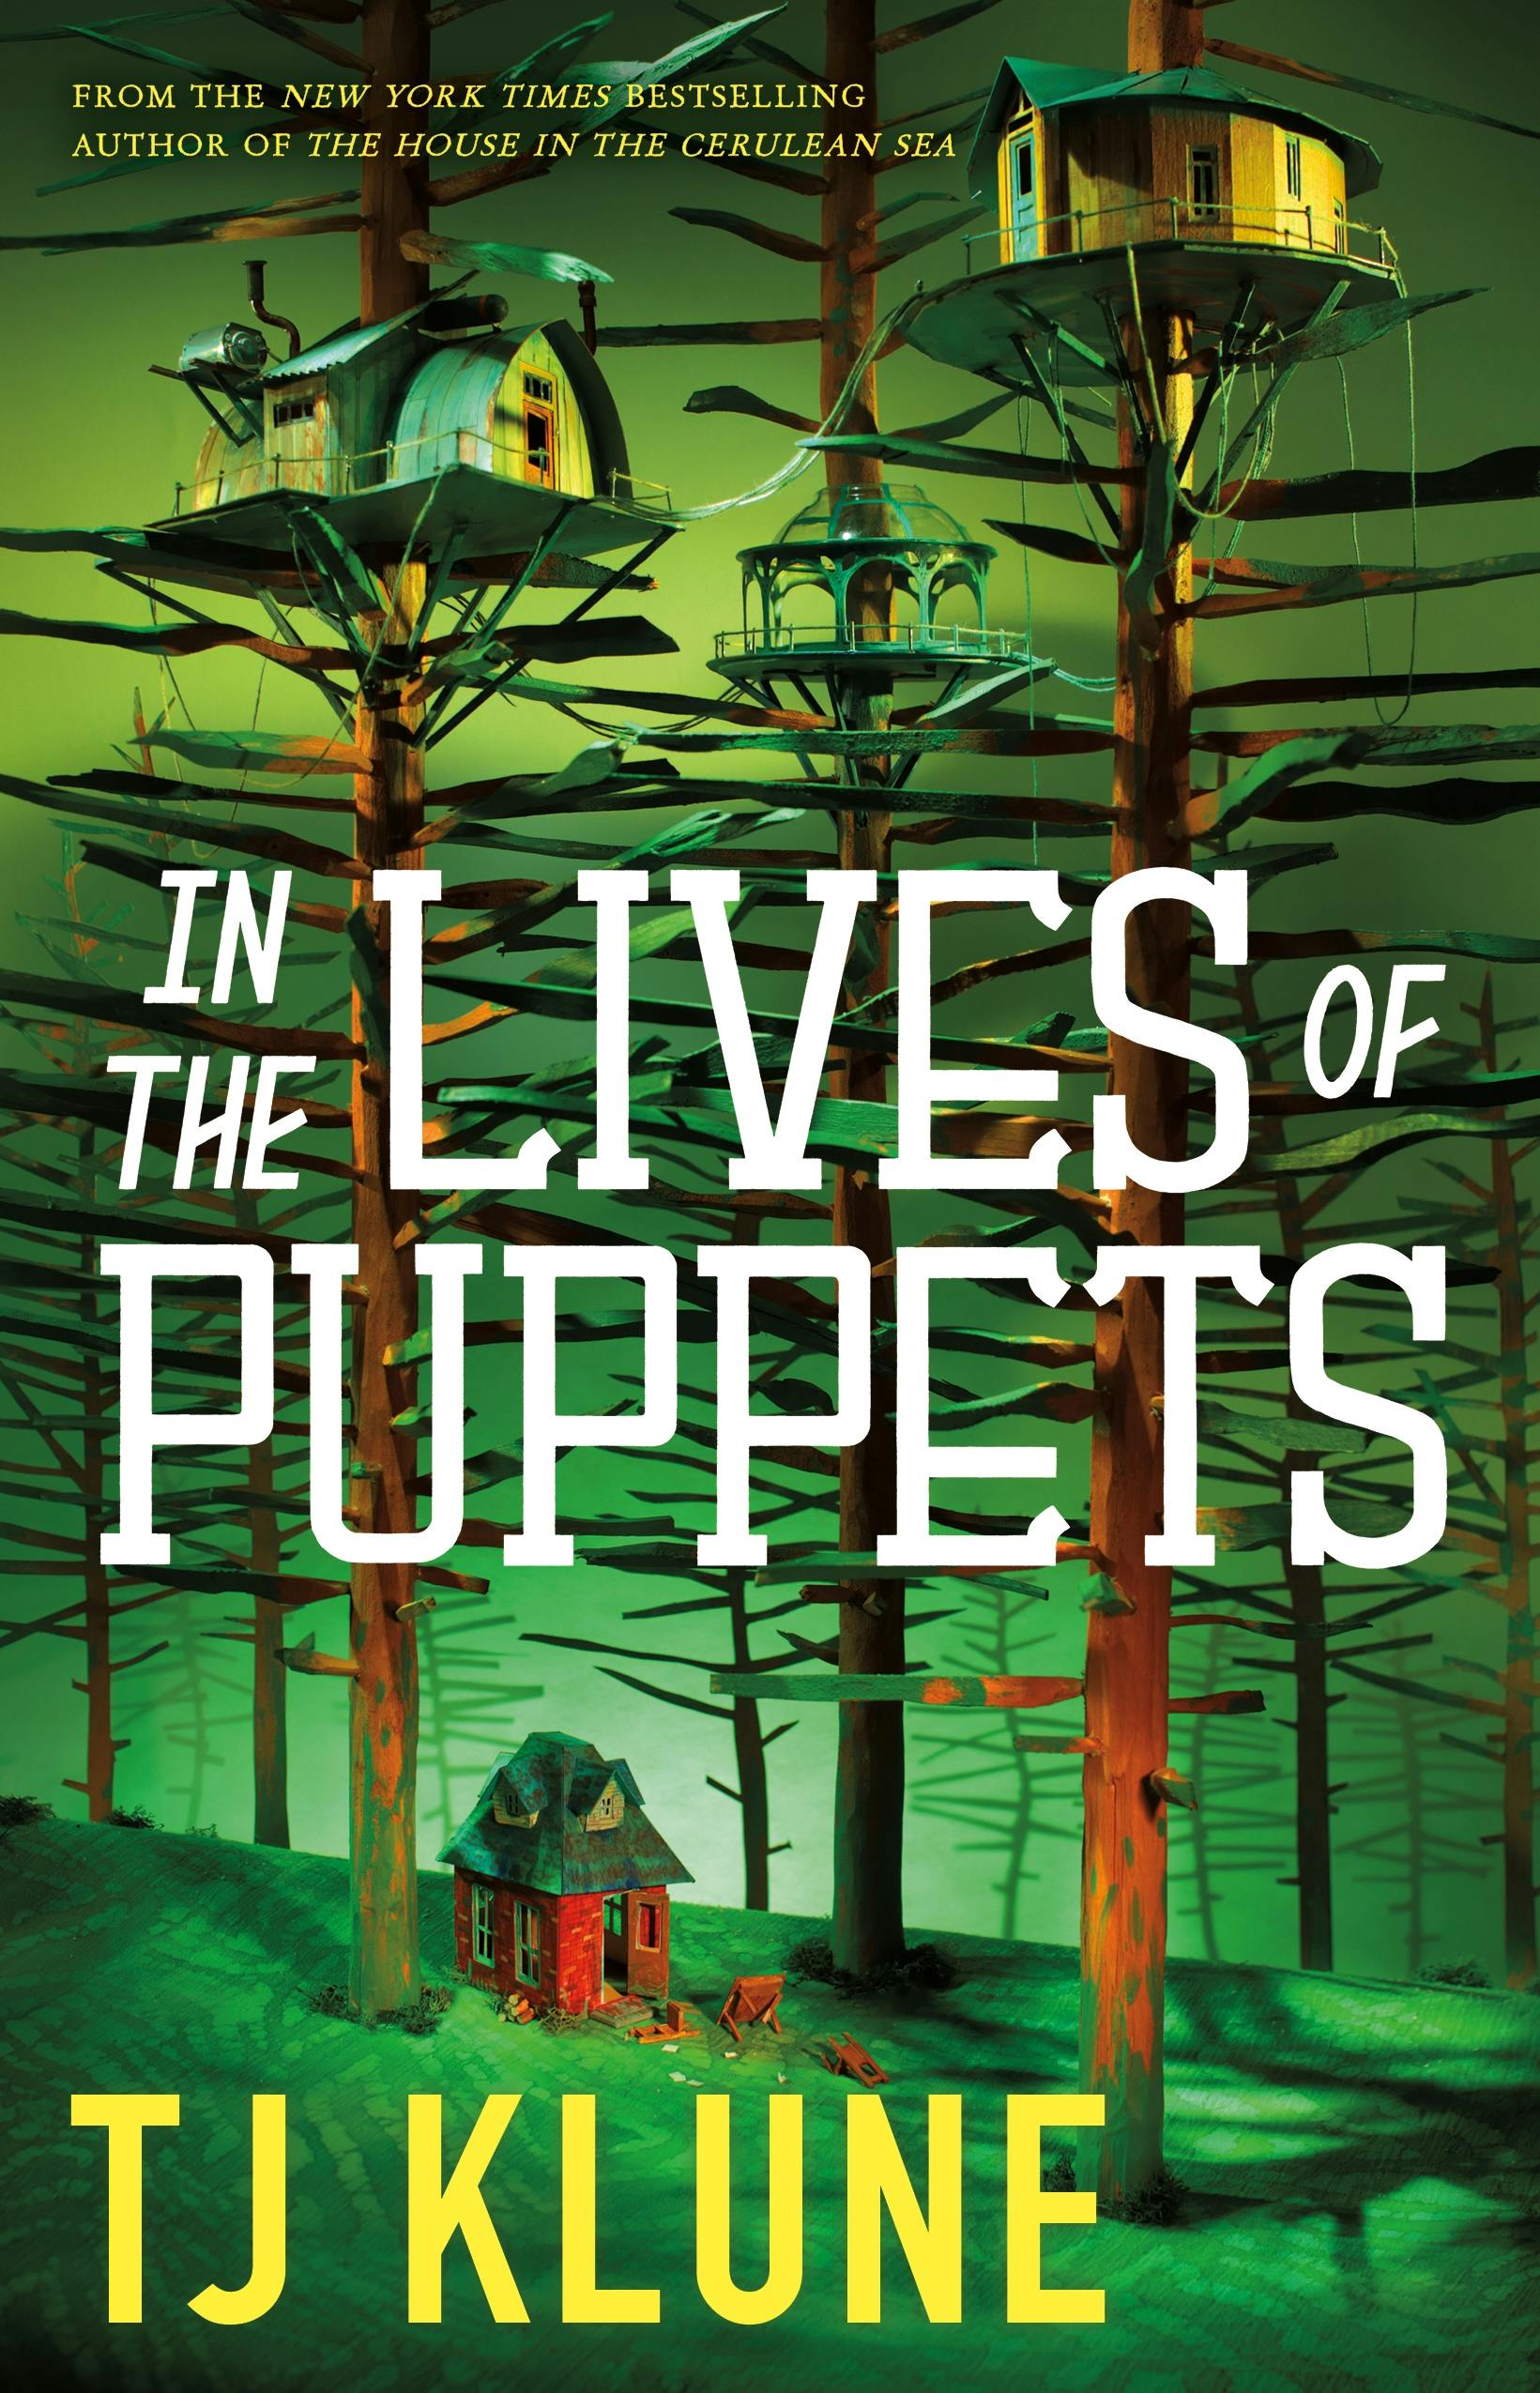 Cover for the book titled as: In the Lives of Puppets